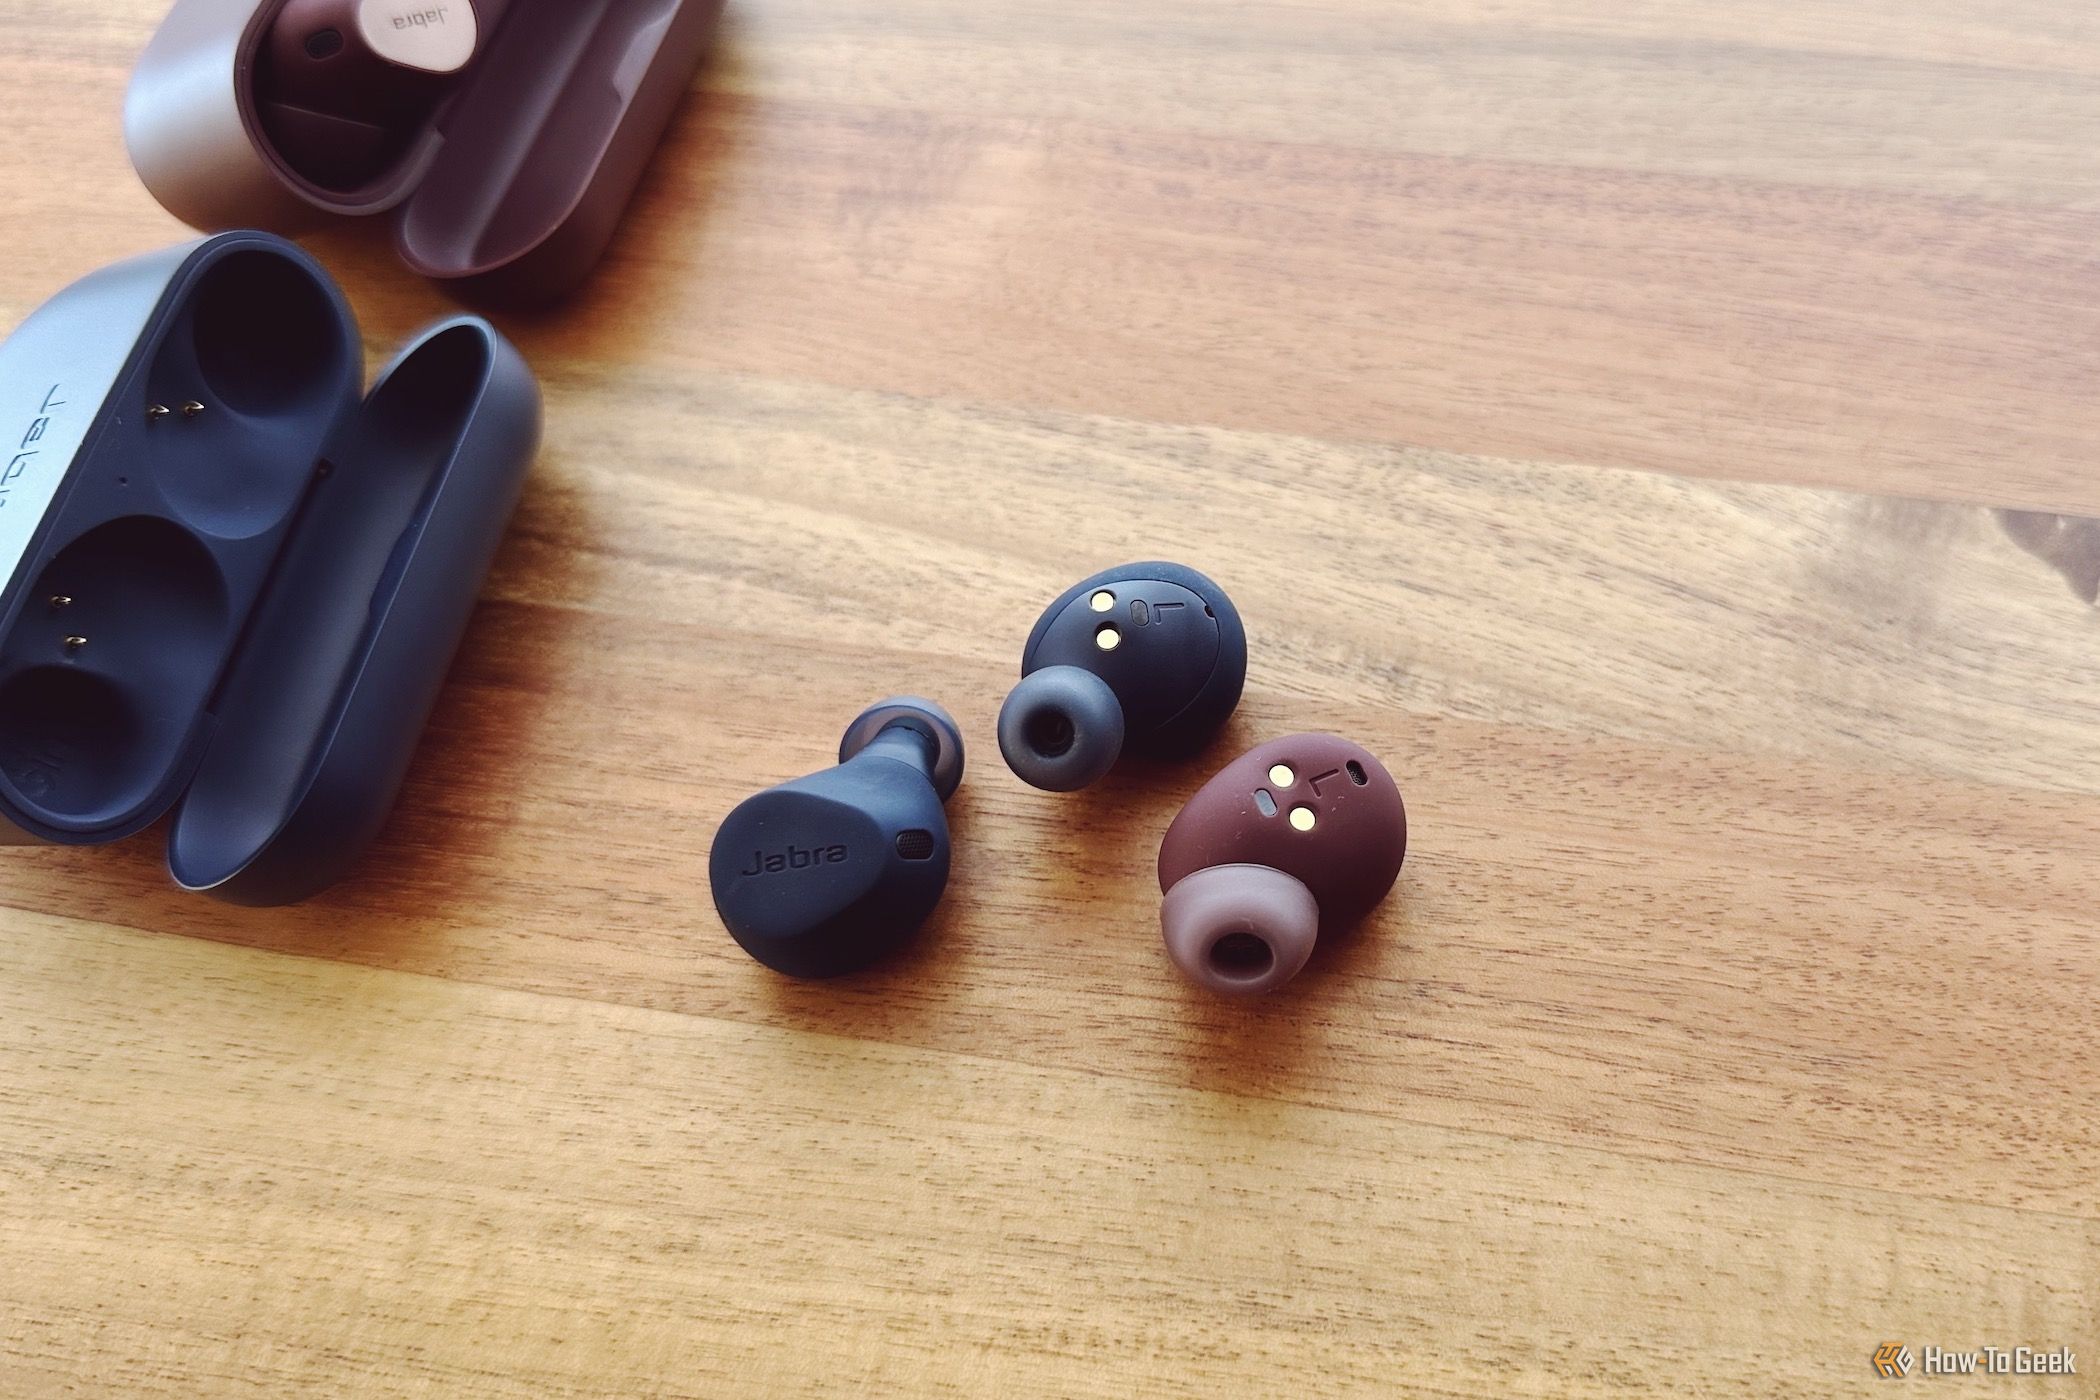 Showing the Jabra Elite 10 earbuds next to the Elite 8 Active